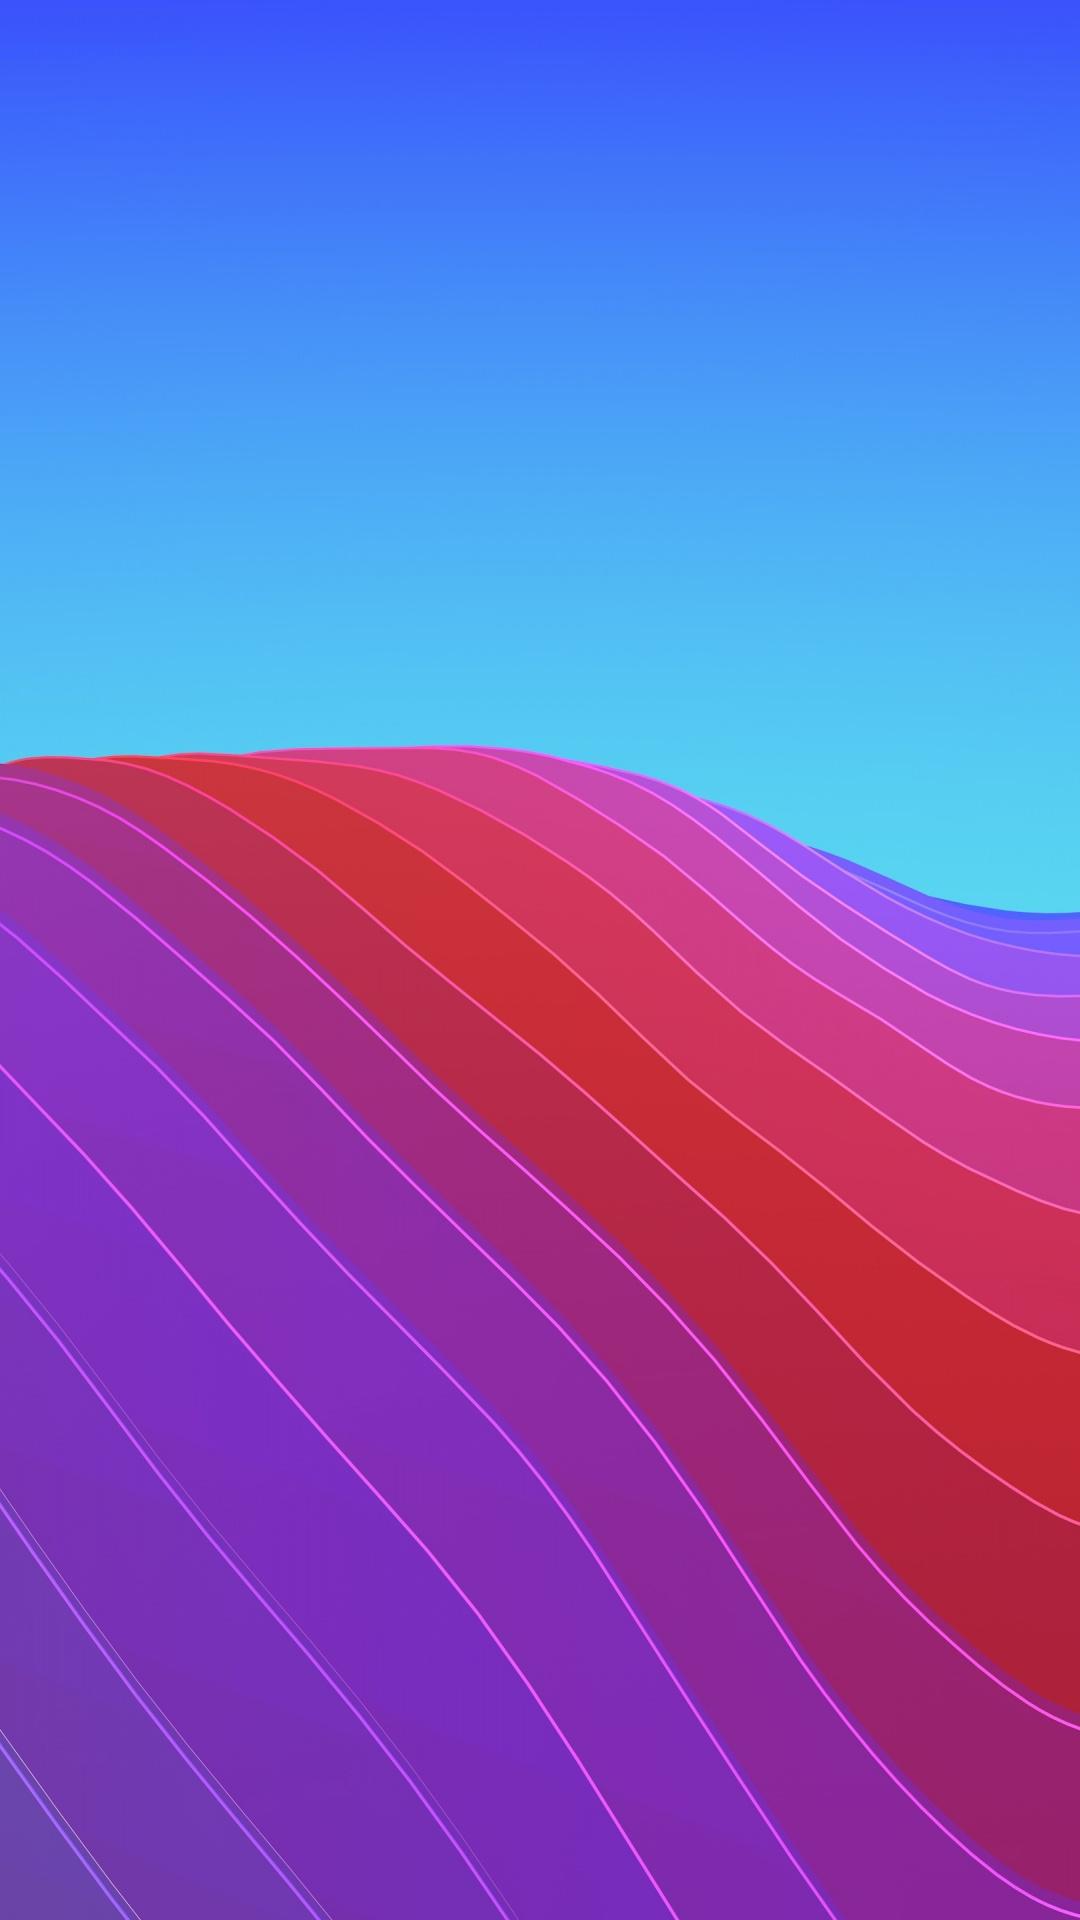 Download 1080x1920 wallpaper waves, abstract, gradient, ios